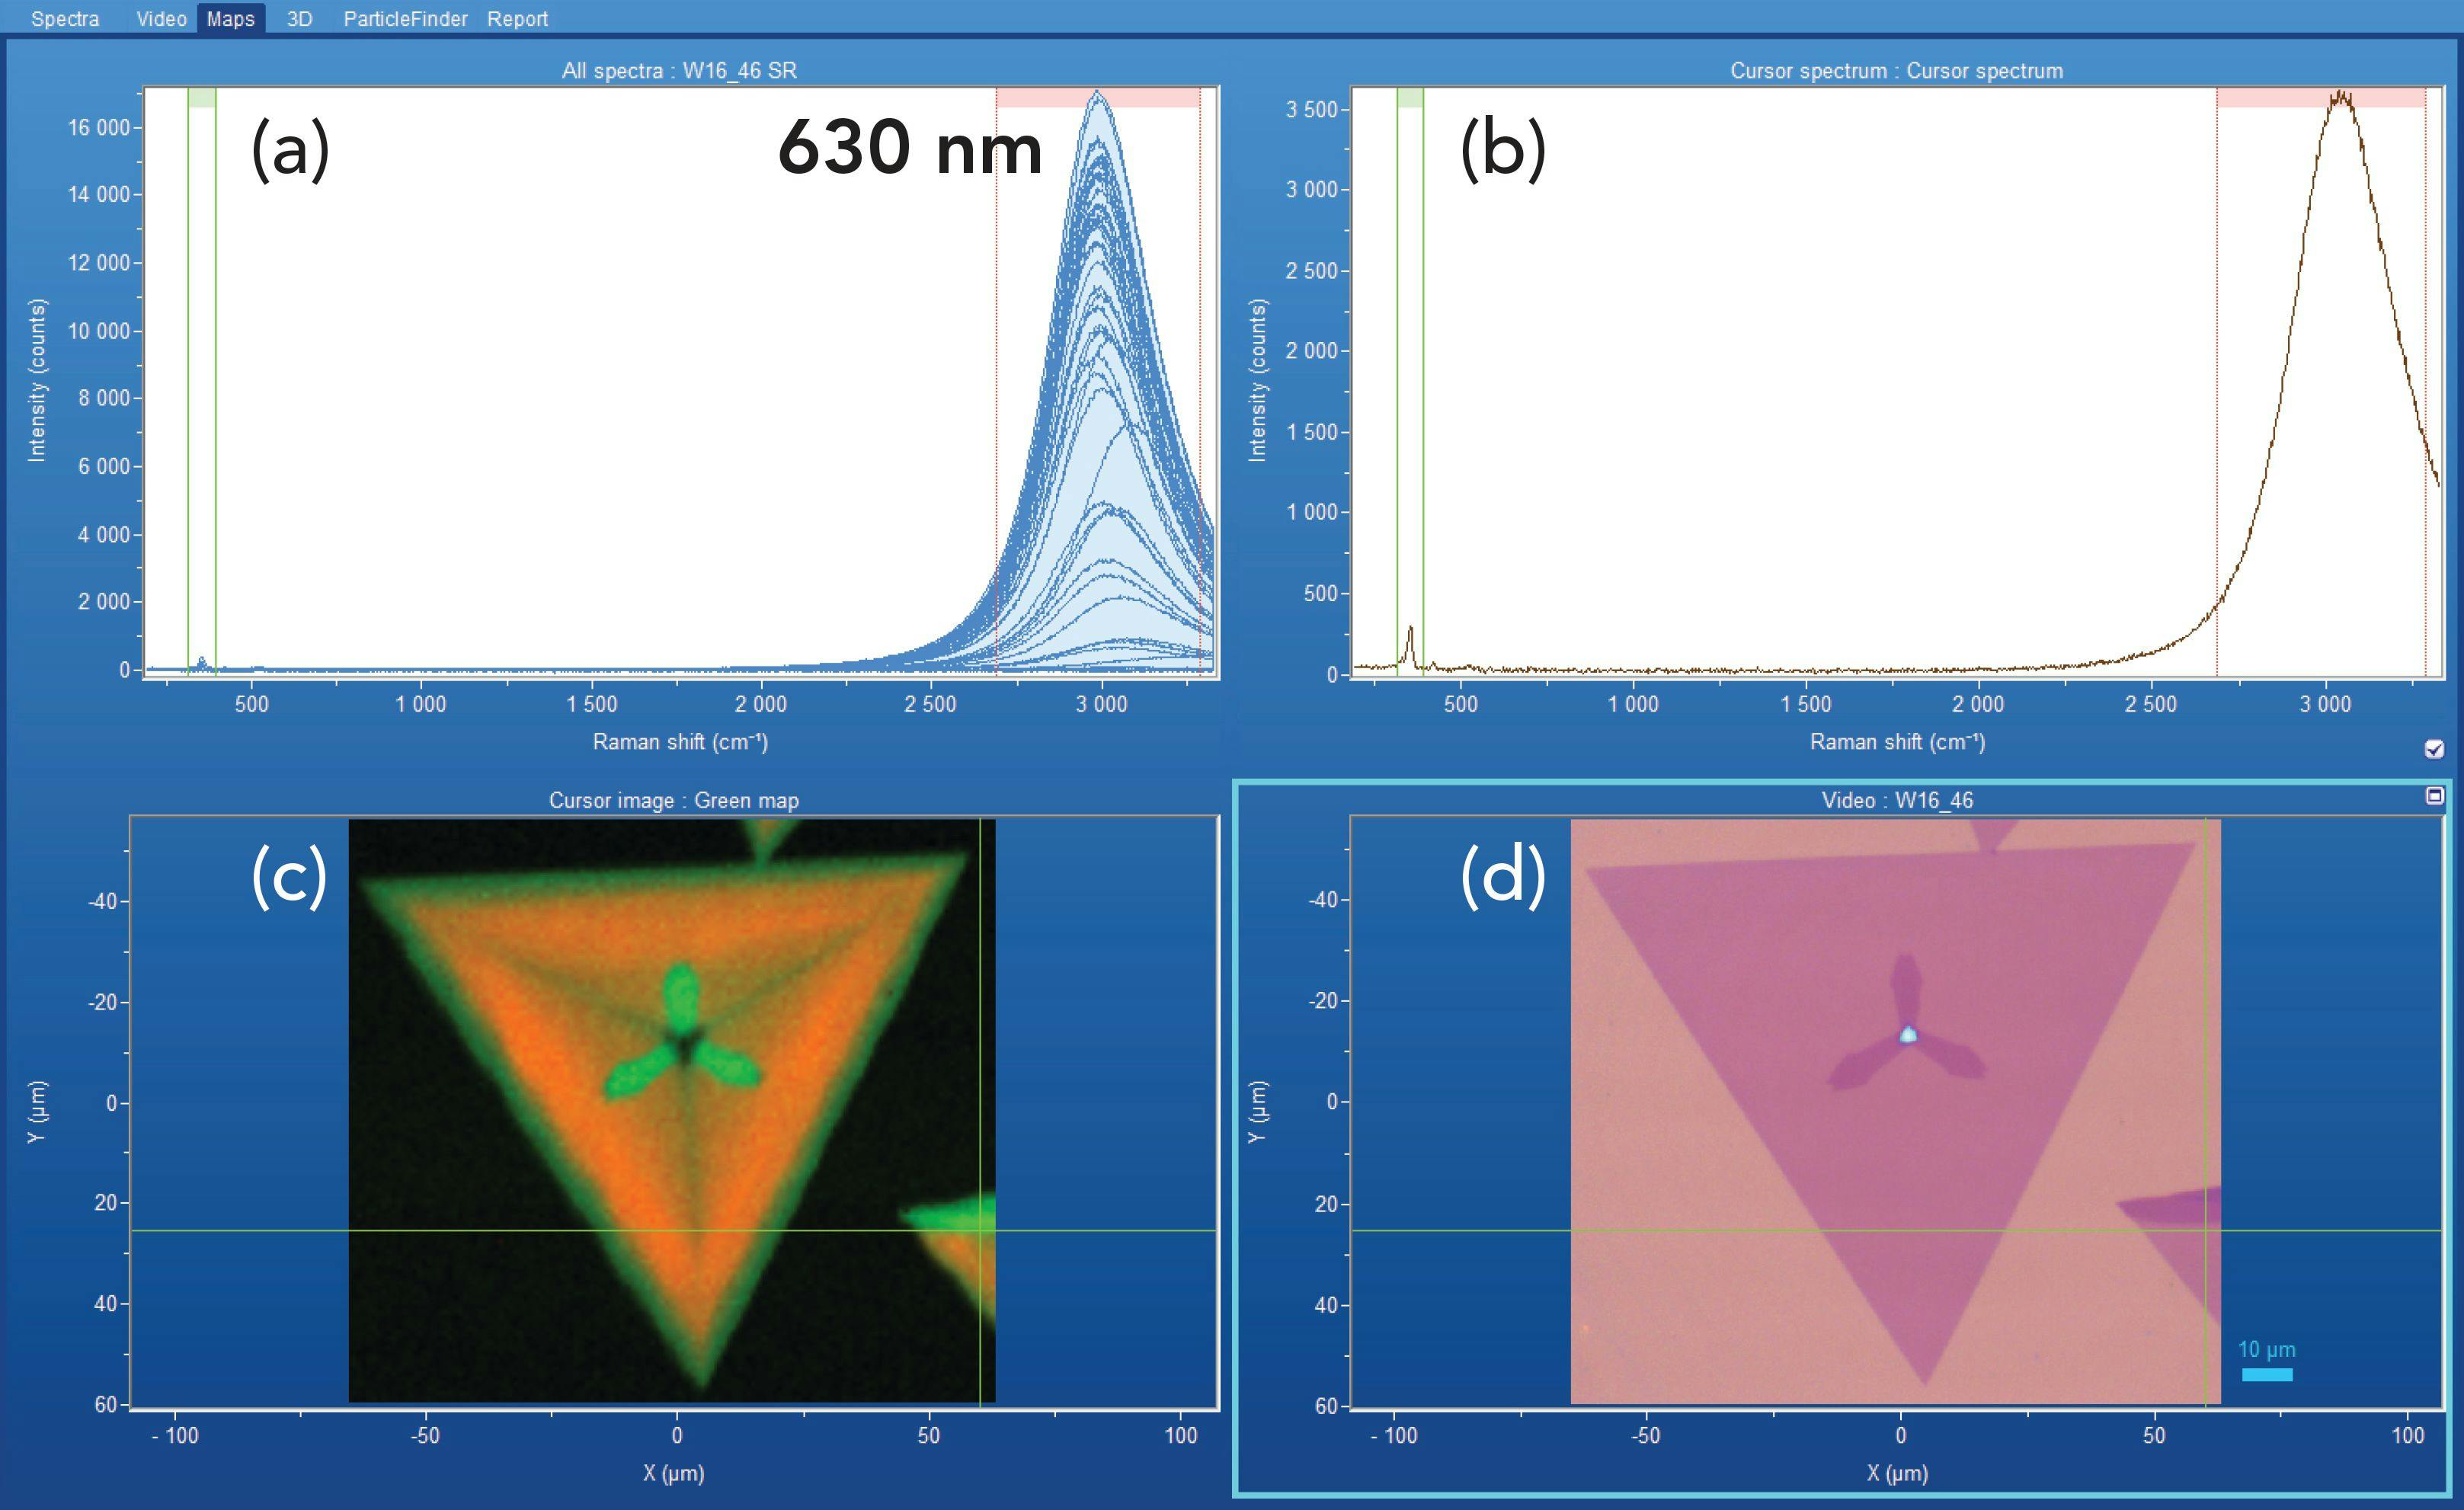 FIGURE 1: (a) hyperspectral data set, (b) cursor spectrum, (c) combinative Raman and photoluminescence image, and (d) reflected white light image of 2-D WS2 crystal.